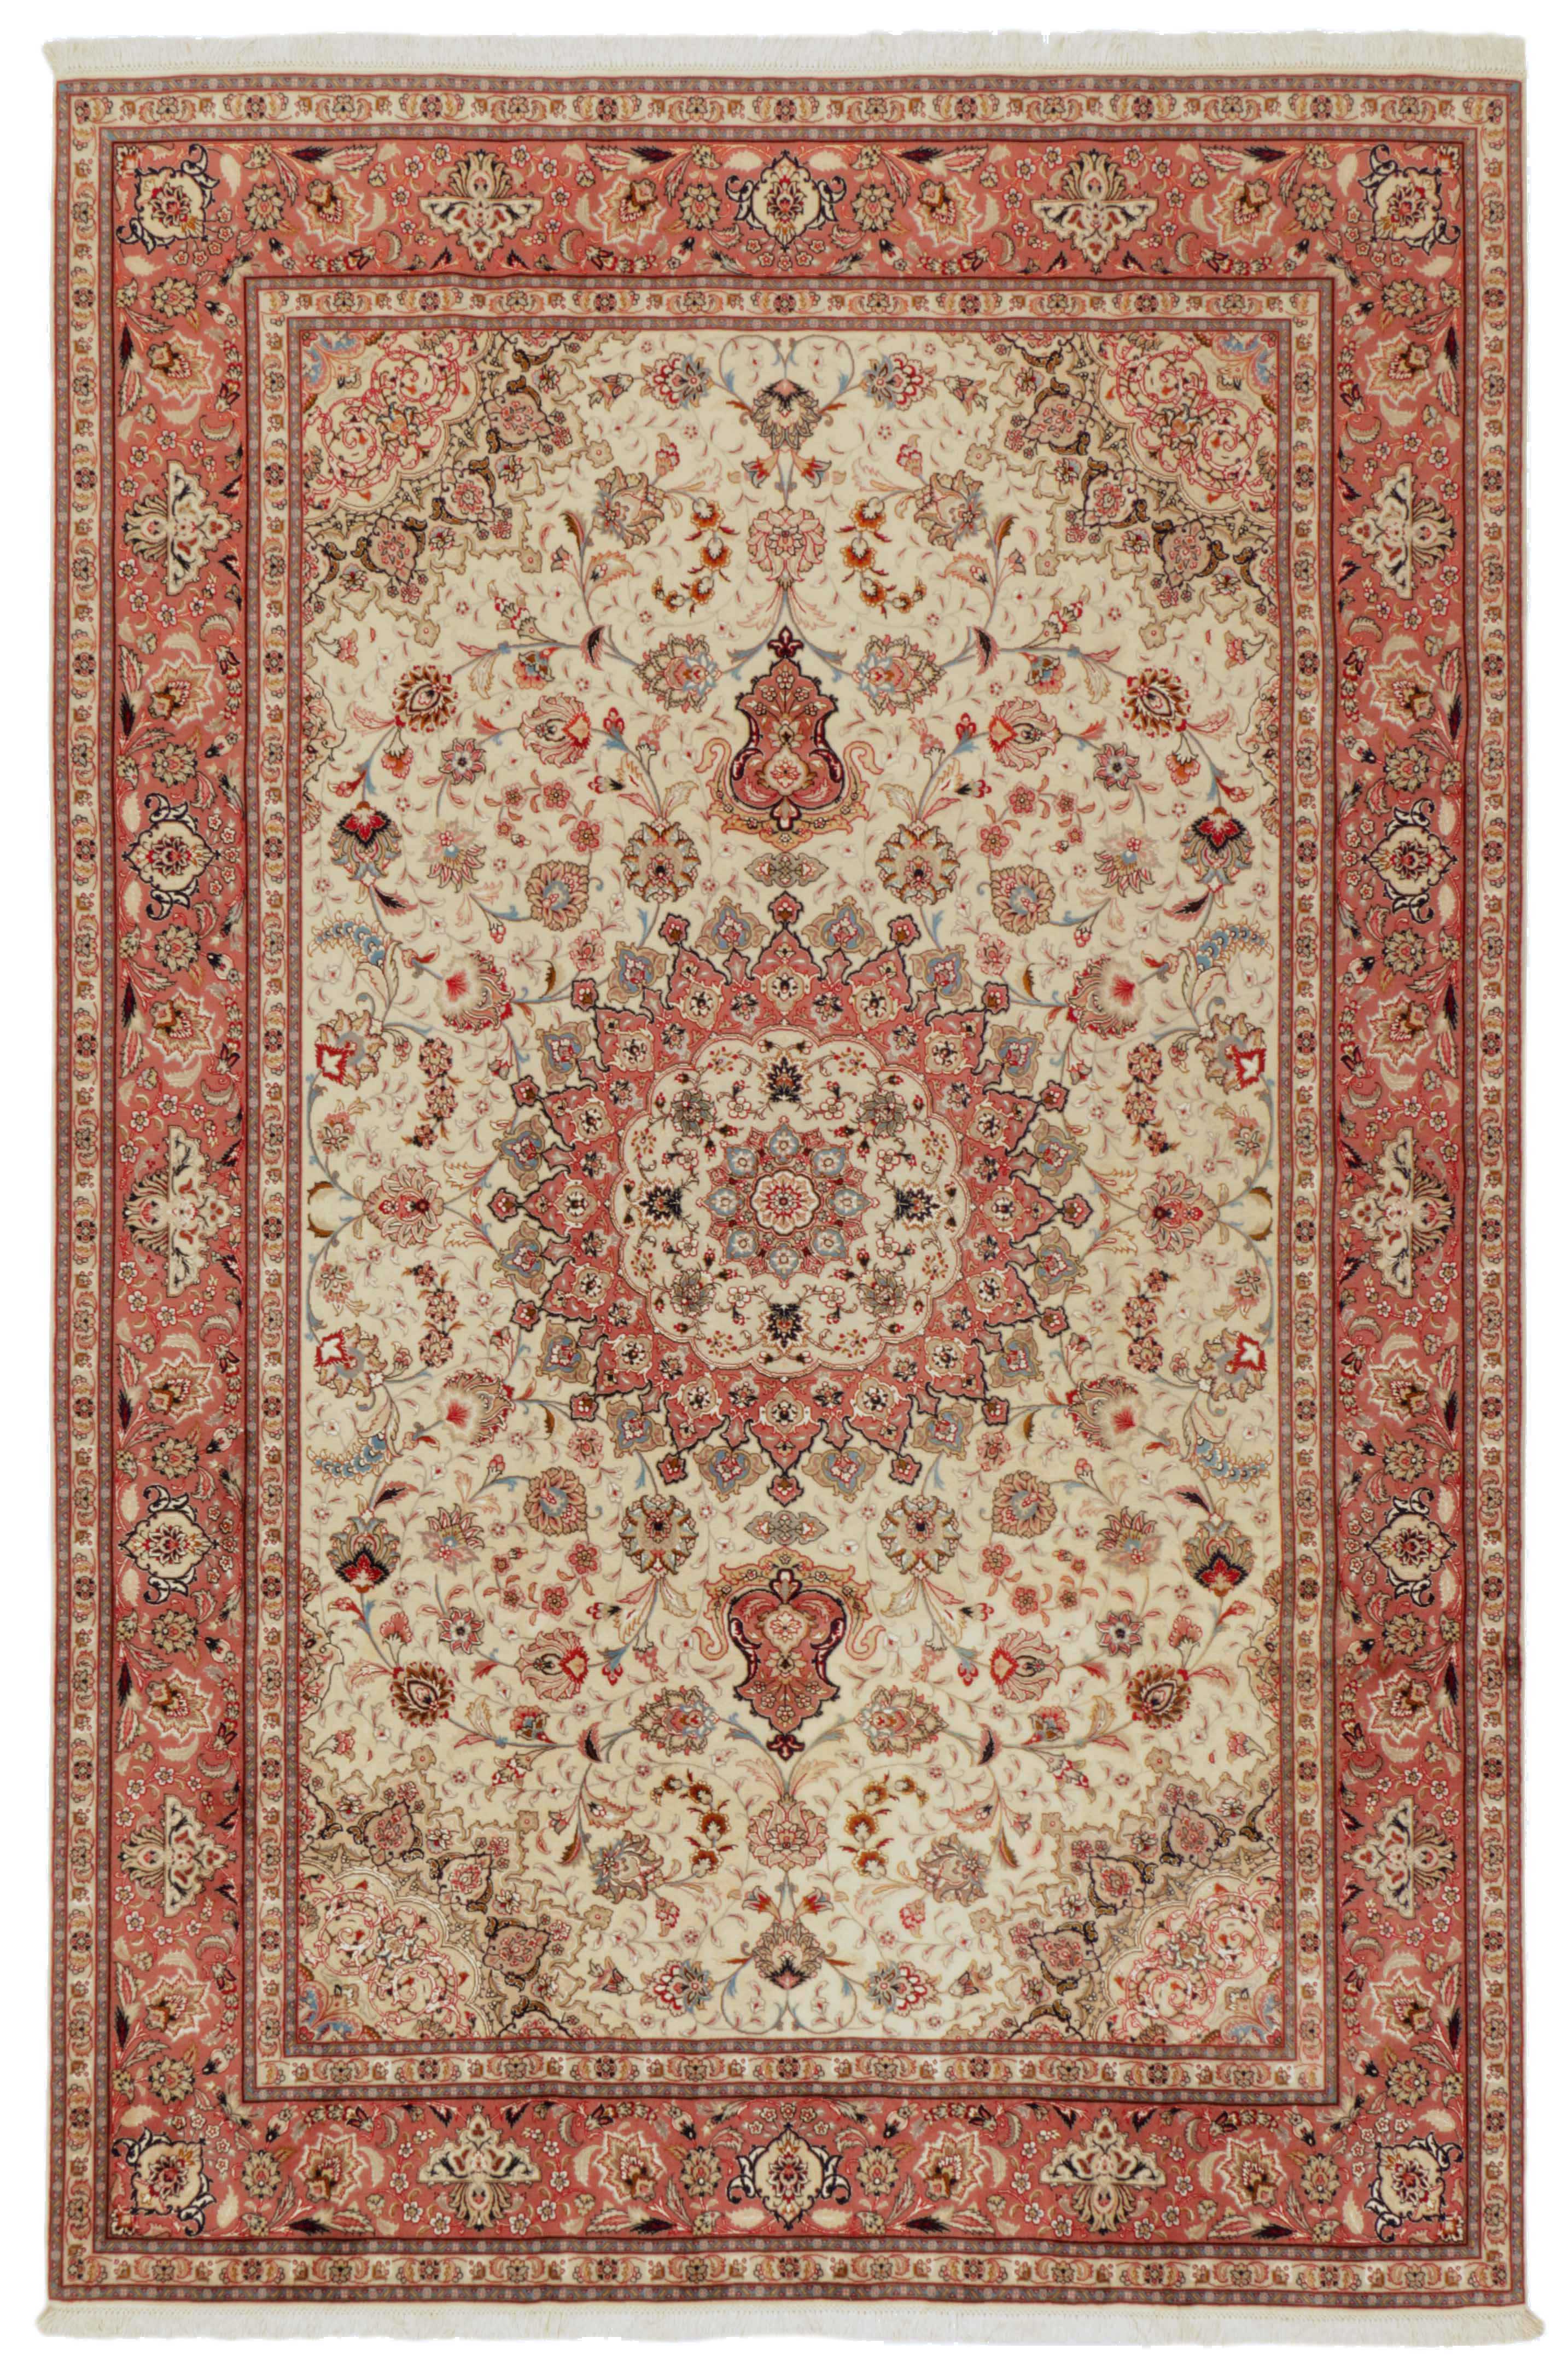 Authentic persian rug with traditional floral design in red, pink and white 